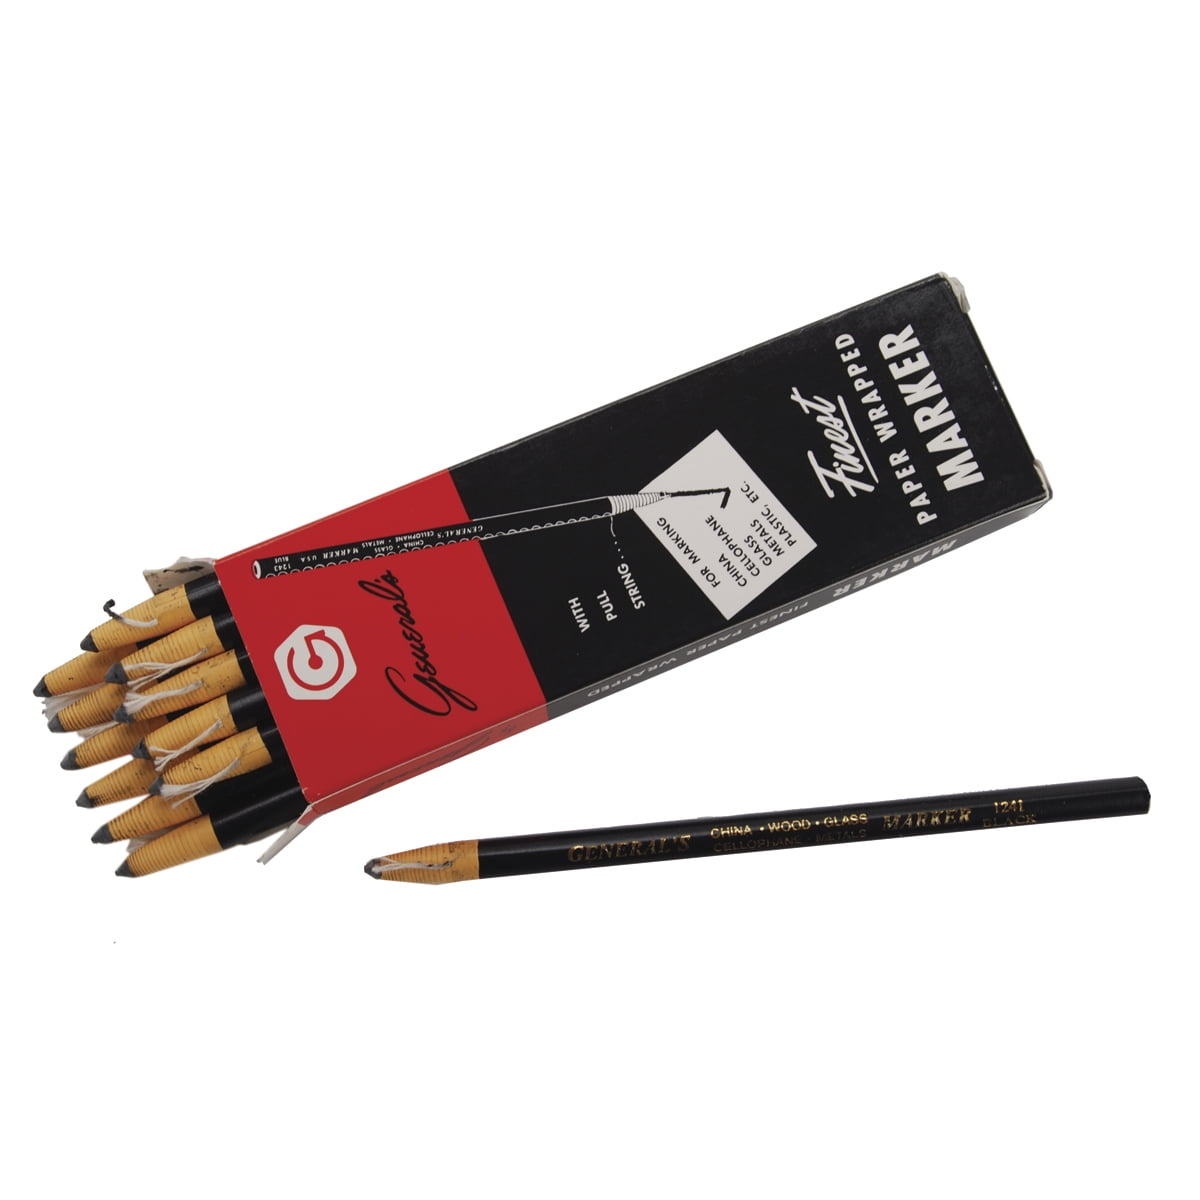 General Brand China Marker (Grease Pencil)-Thin Black BR163T1